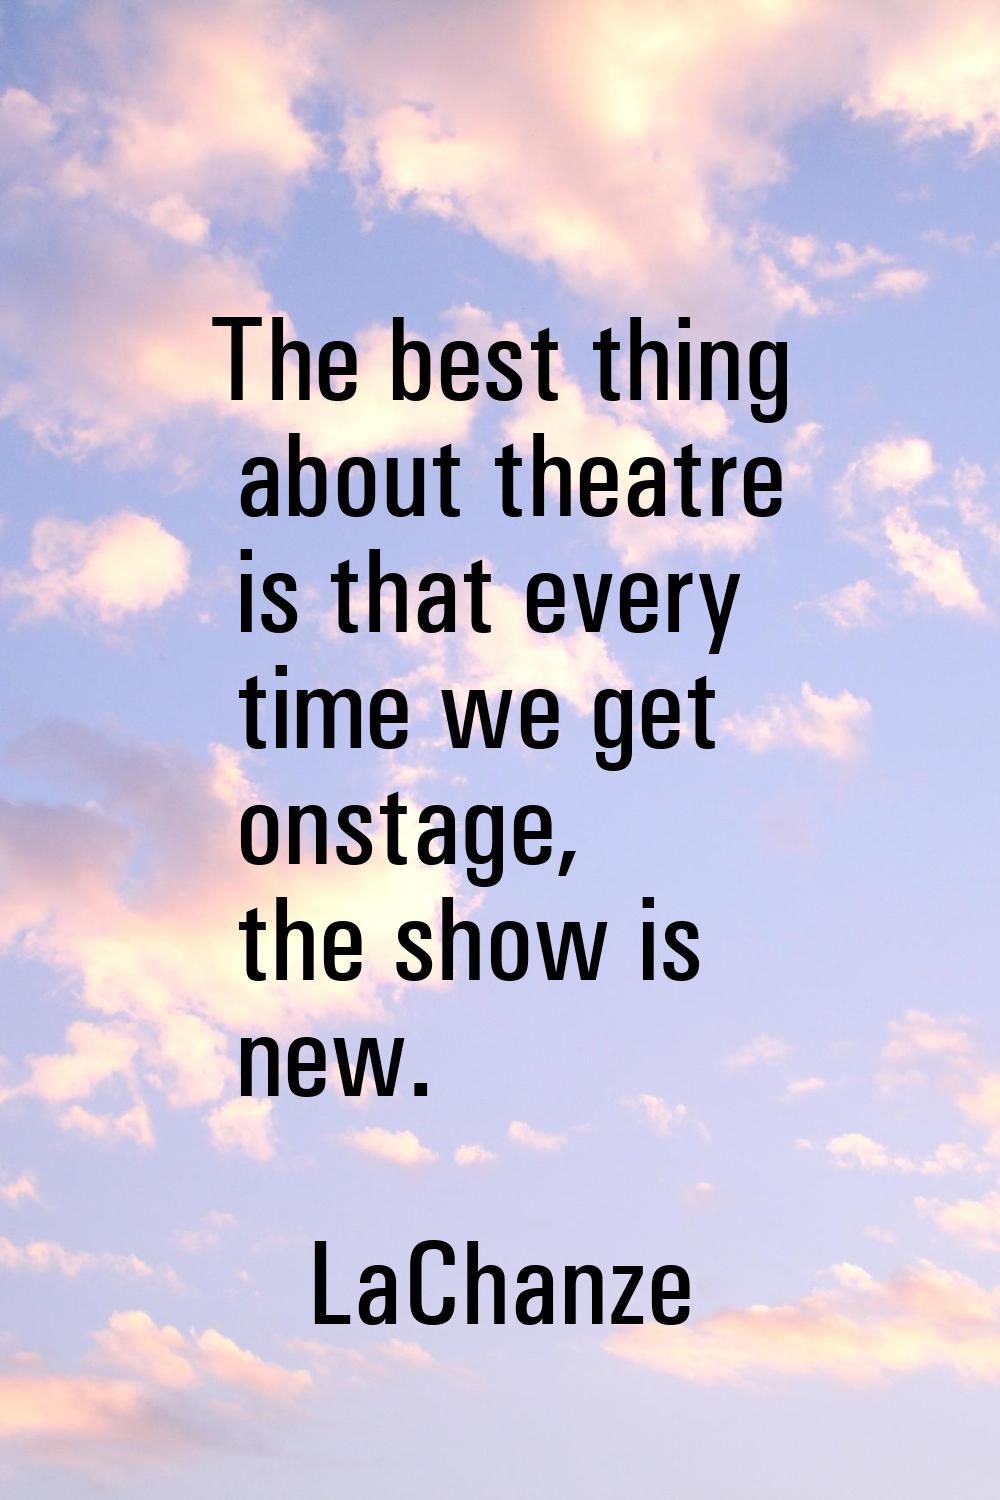 The best thing about theatre is that every time we get onstage, the show is new.